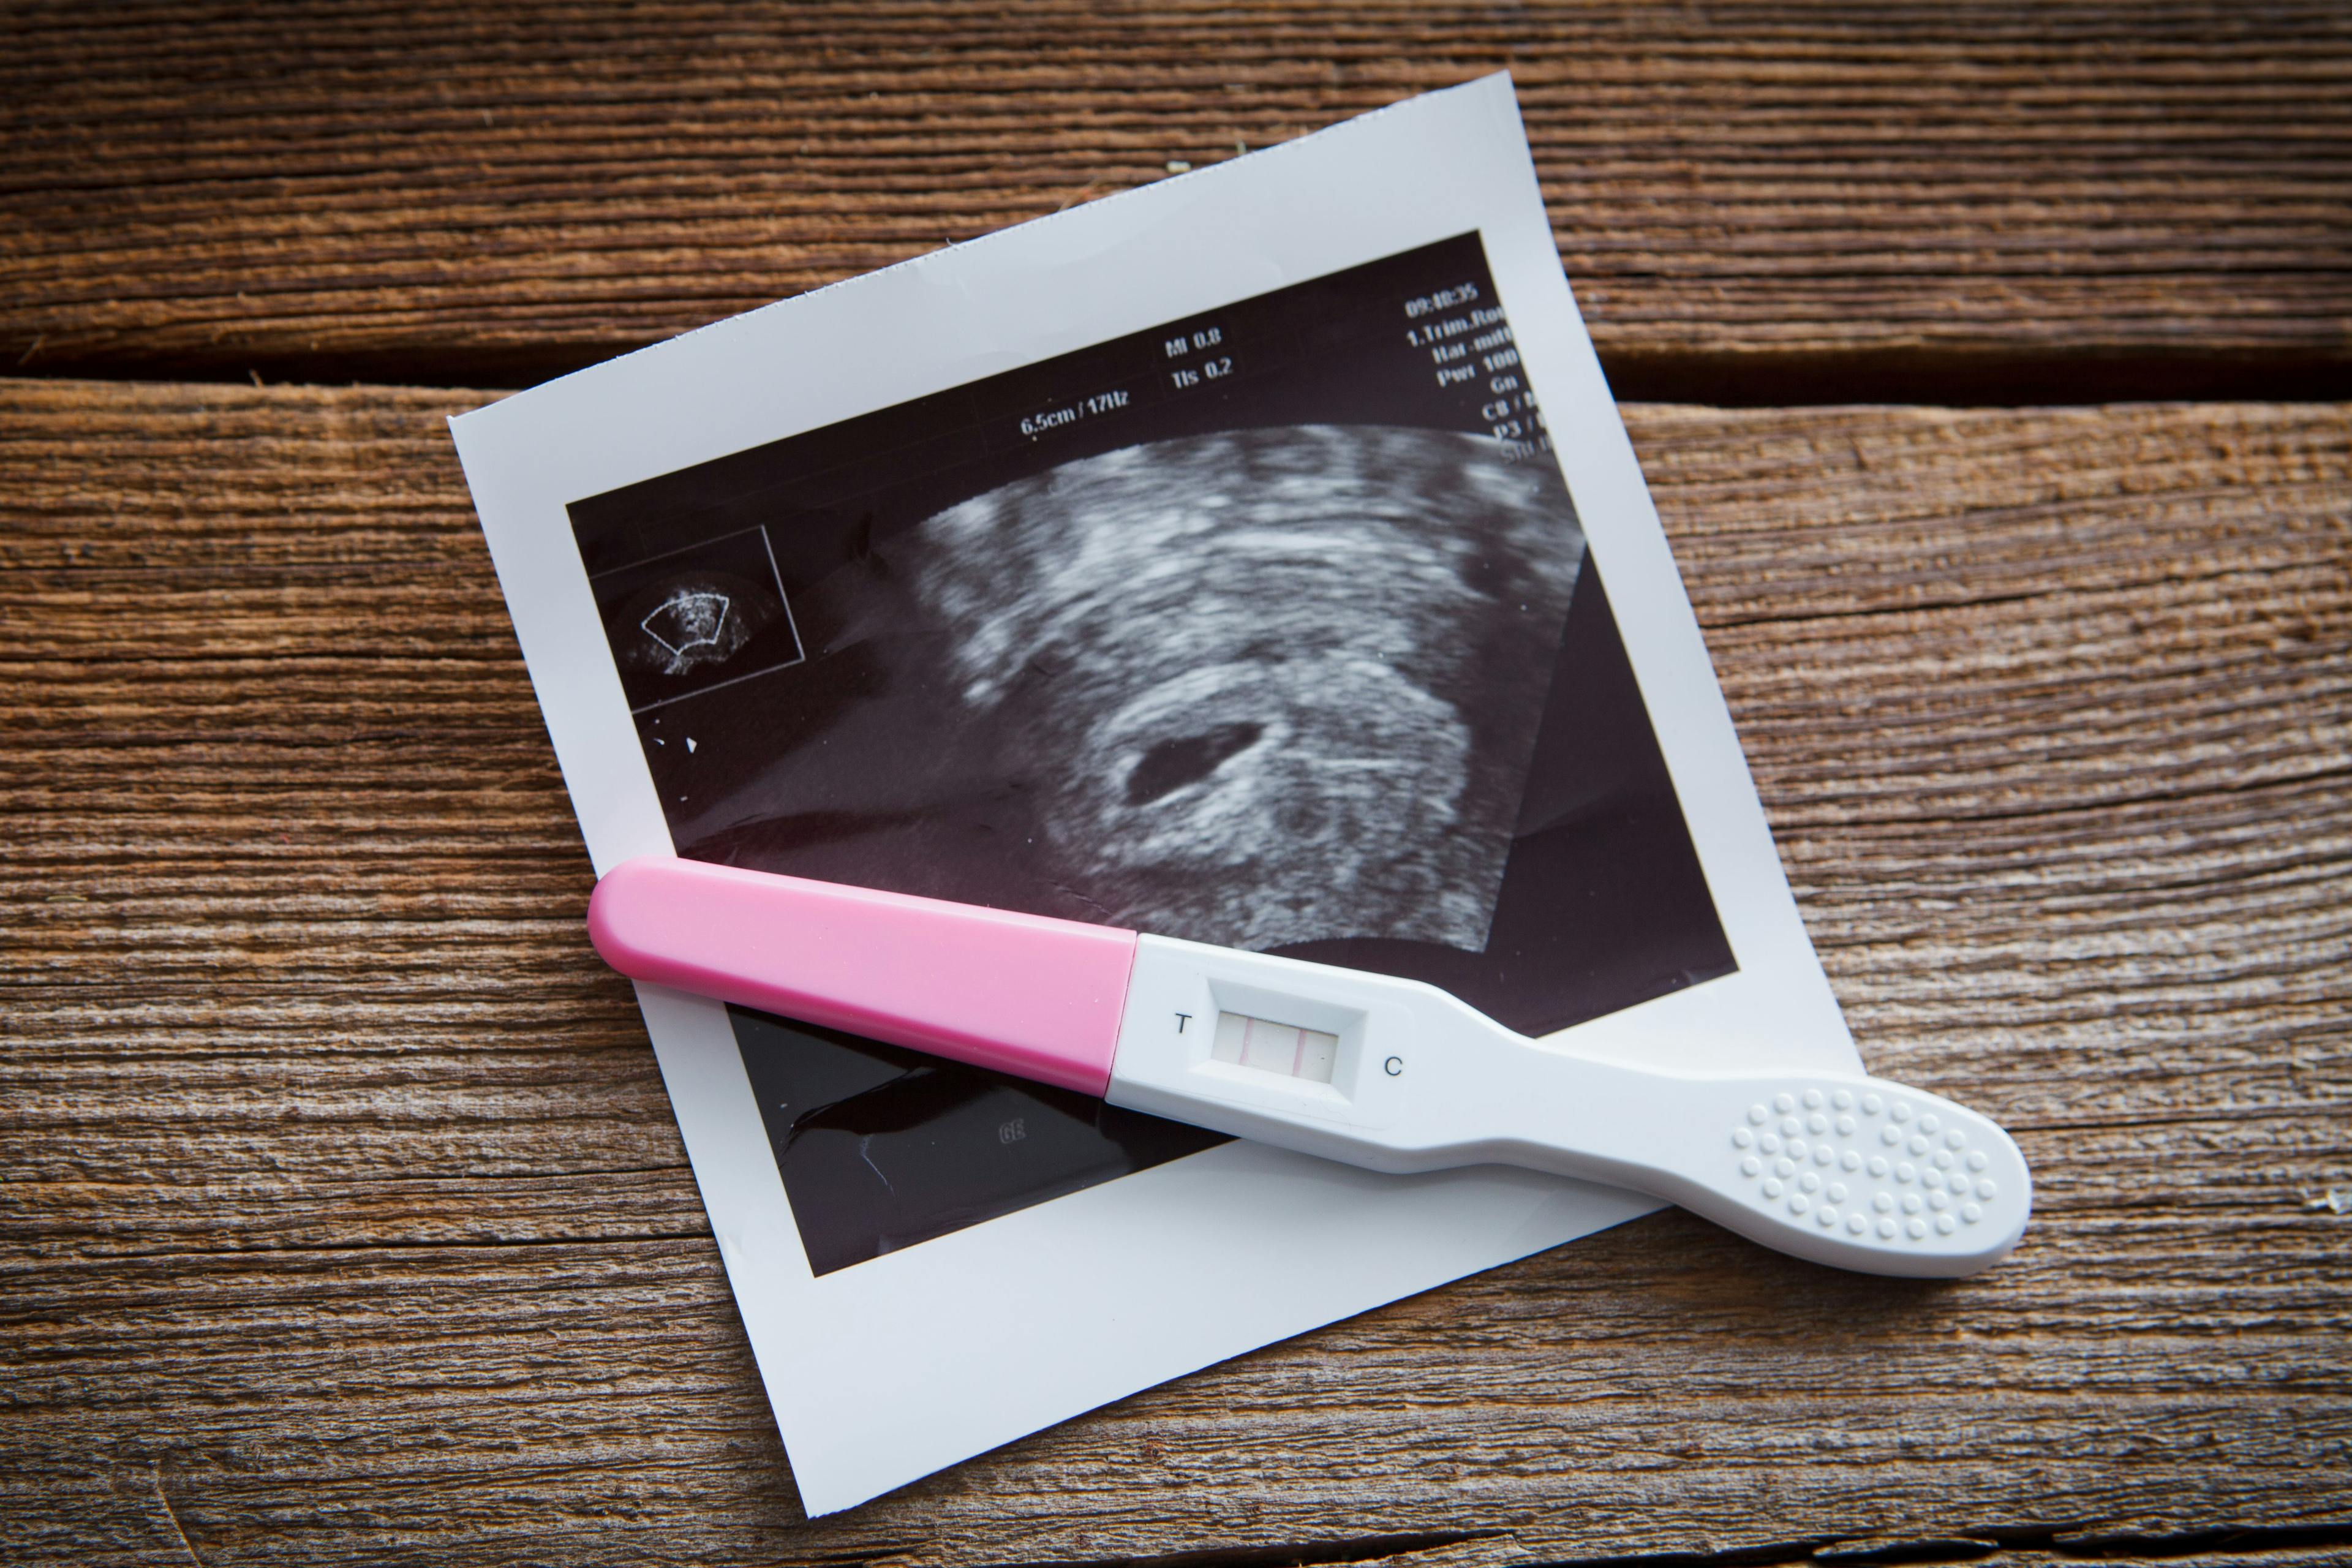 Image of a sonogram and a positive pregnancy test on a wooden surface.